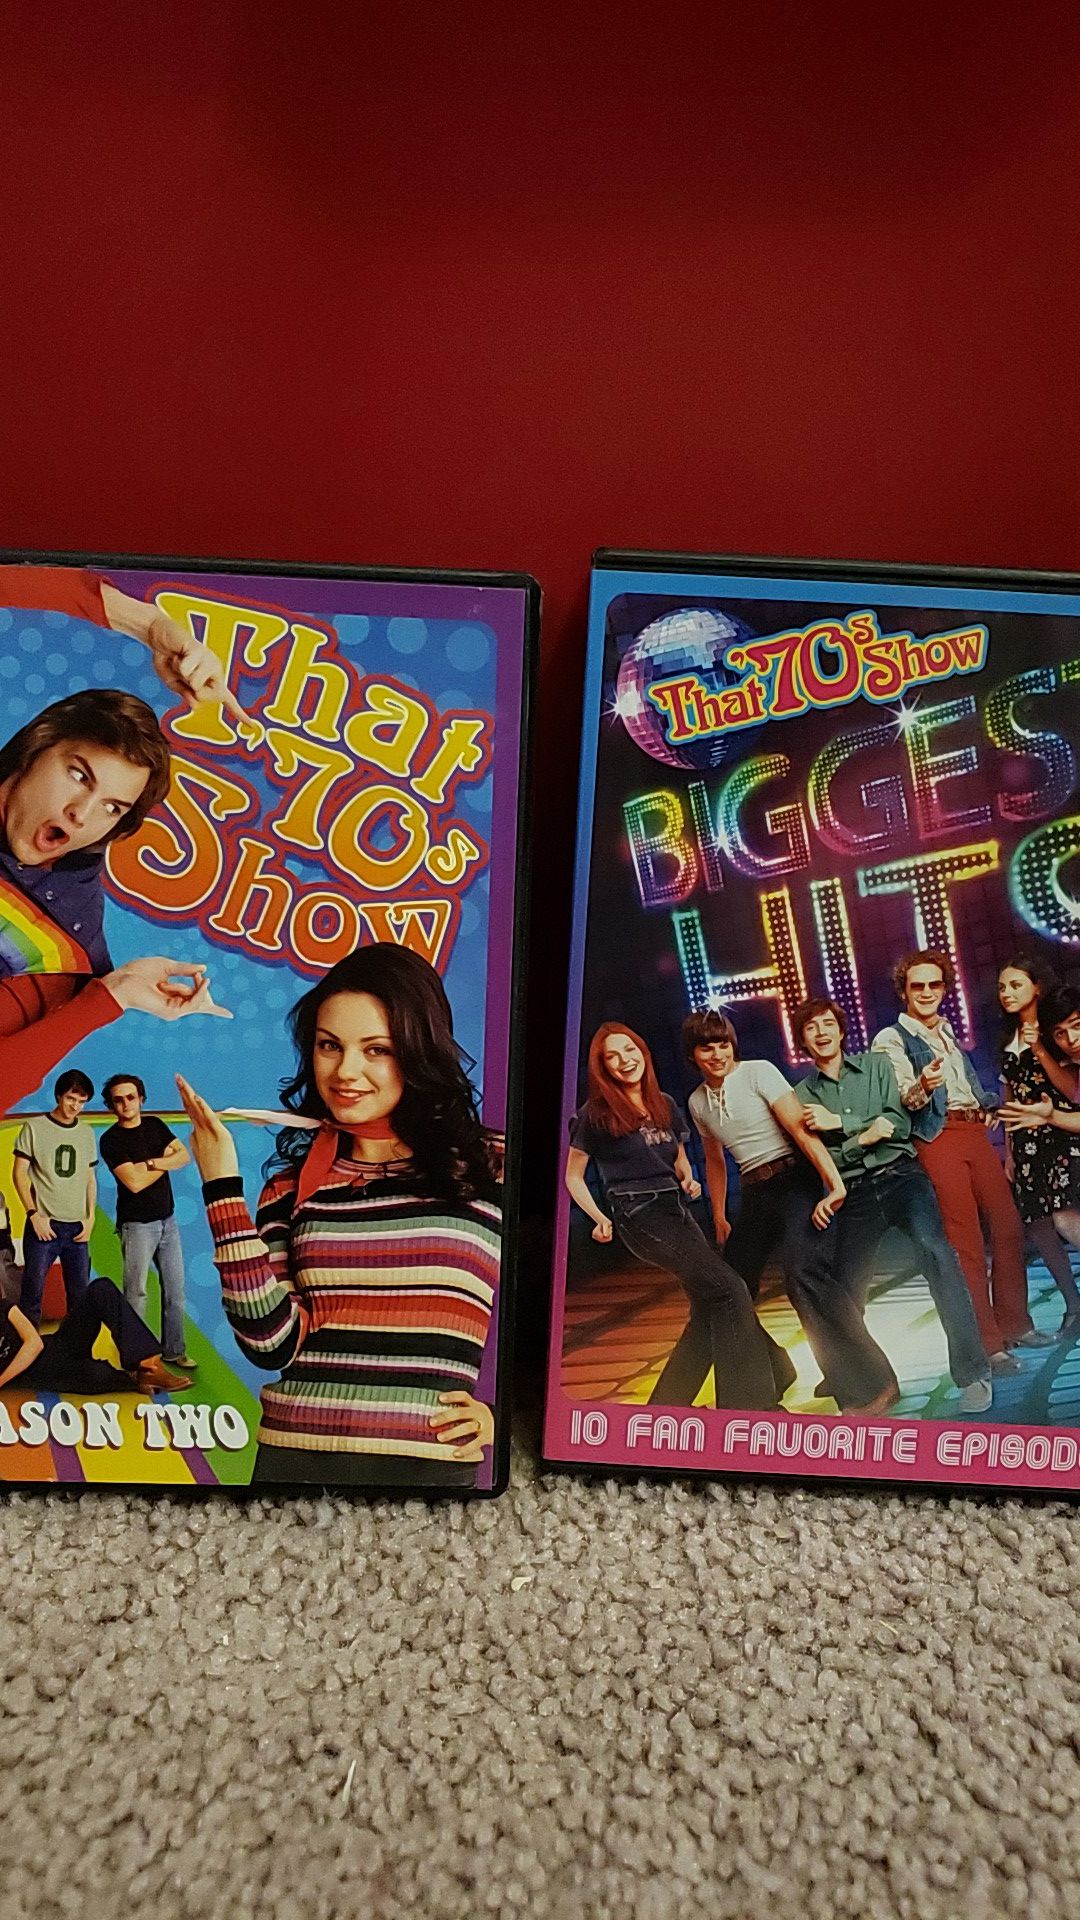 Movie. That 70s show.